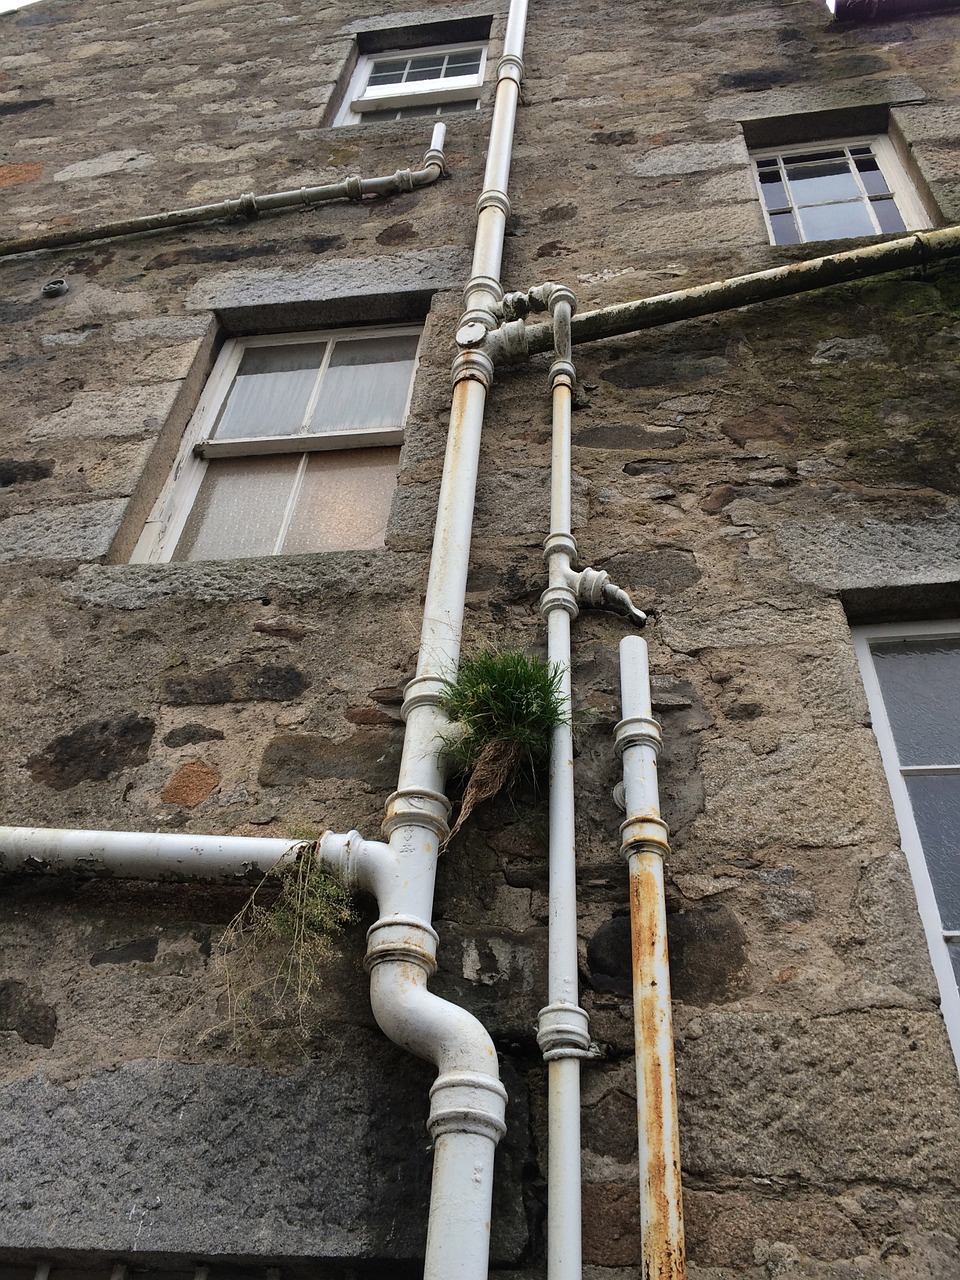 downspout highlands scotland free photo